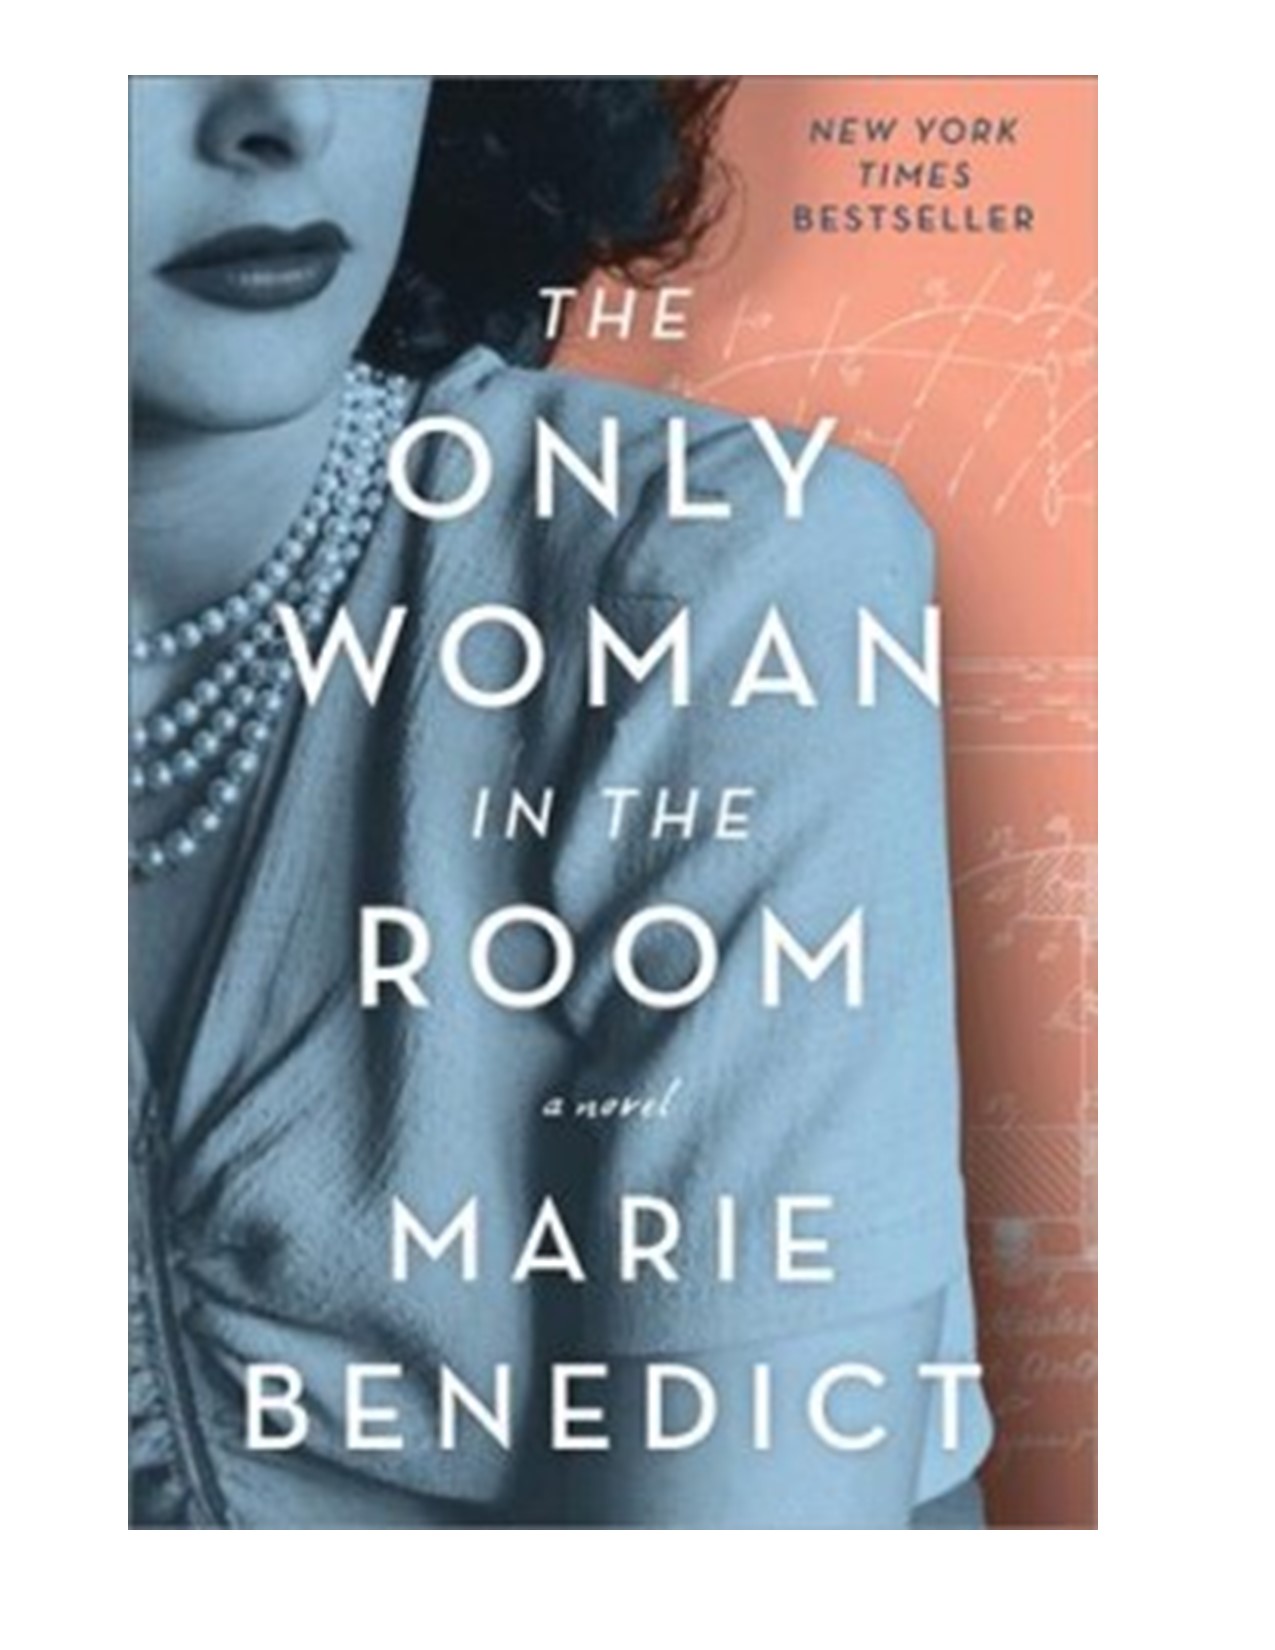 The Only Woman in the Room book cover